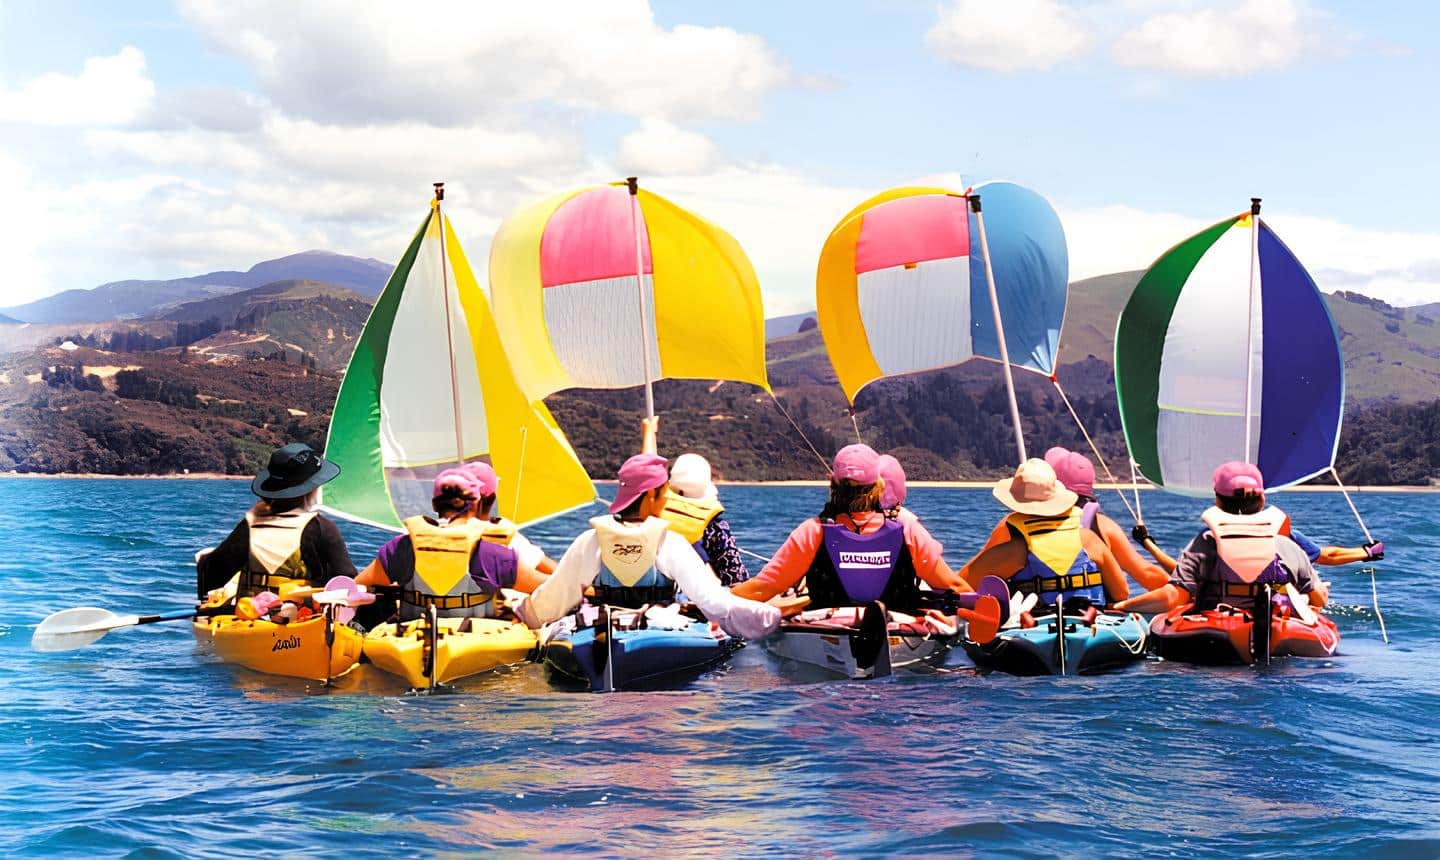 Hoist your sails and relax on sea kayaking vacation to New Zealand with Canyon Calling women-only tours